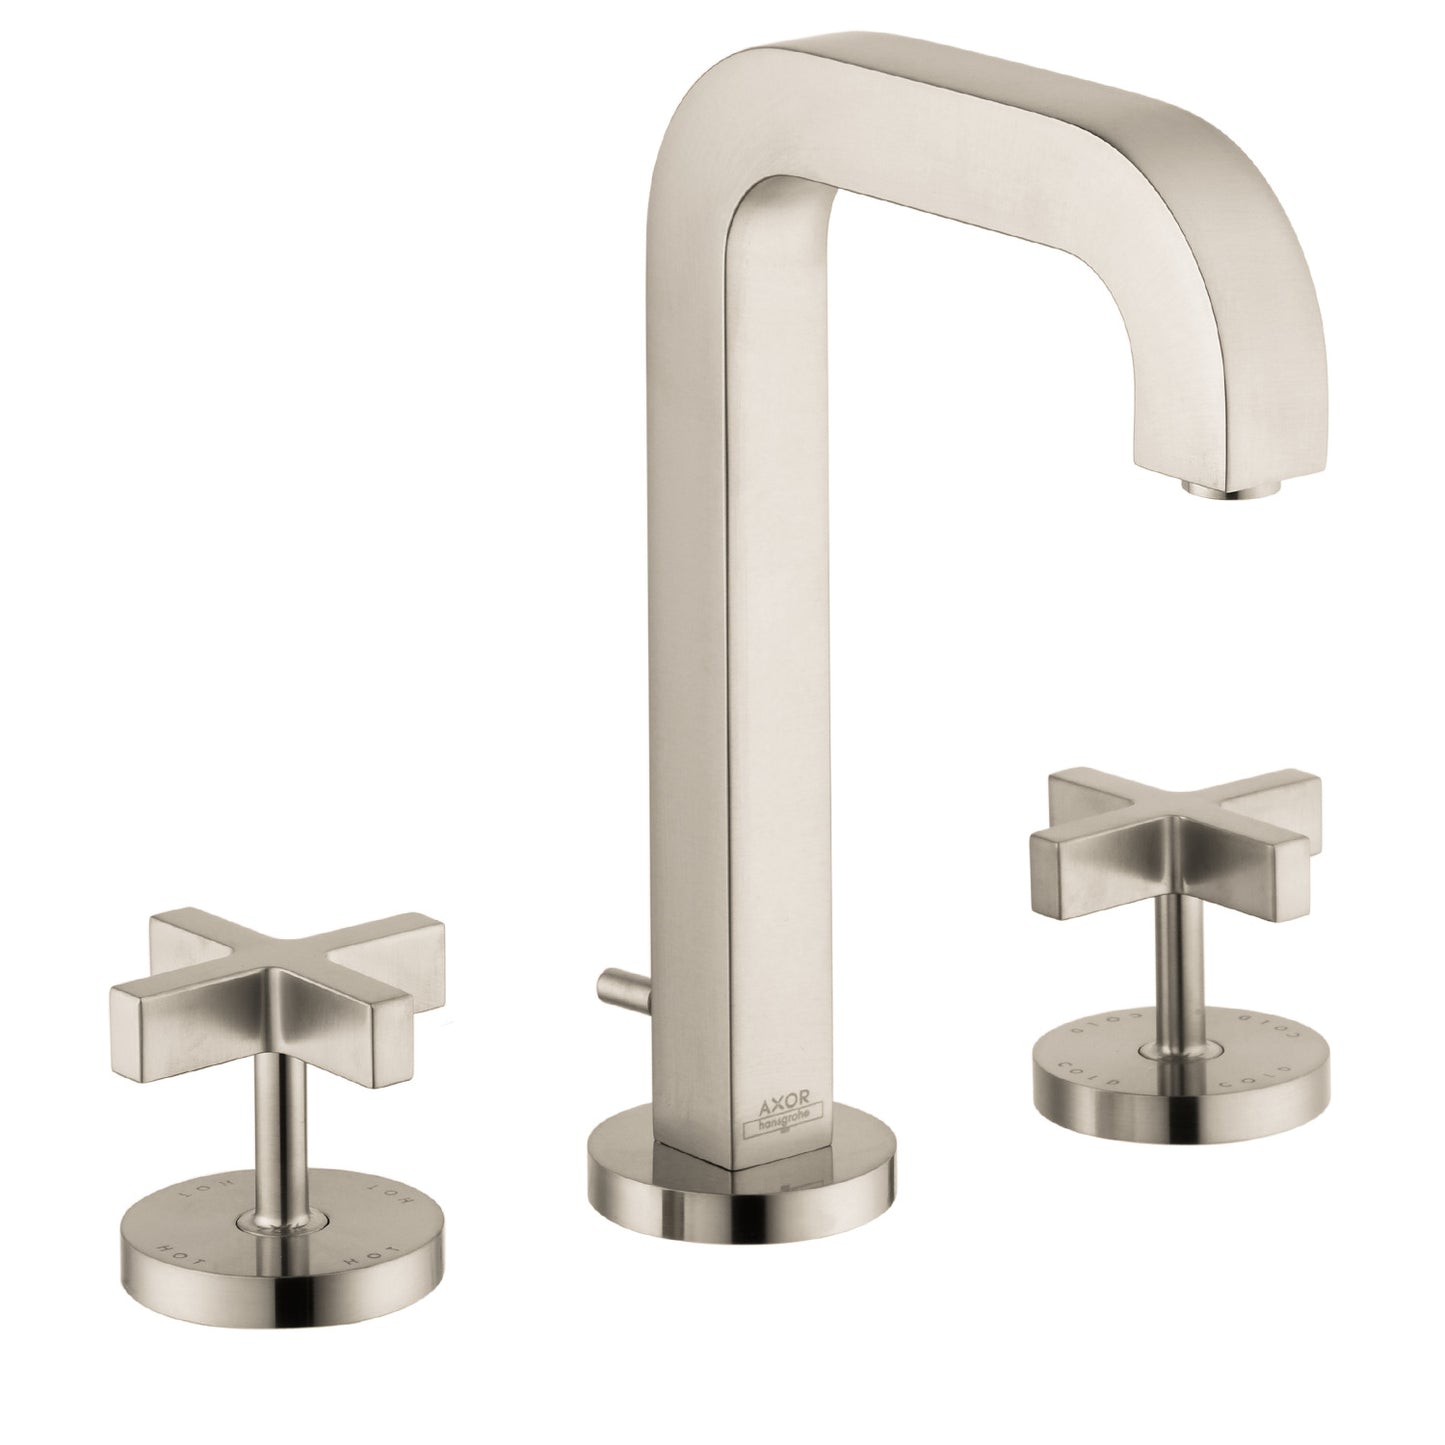 AXOR 39133821 Brushed Nickel Citterio Modern Widespread Bathroom Faucet 1.2 GPM